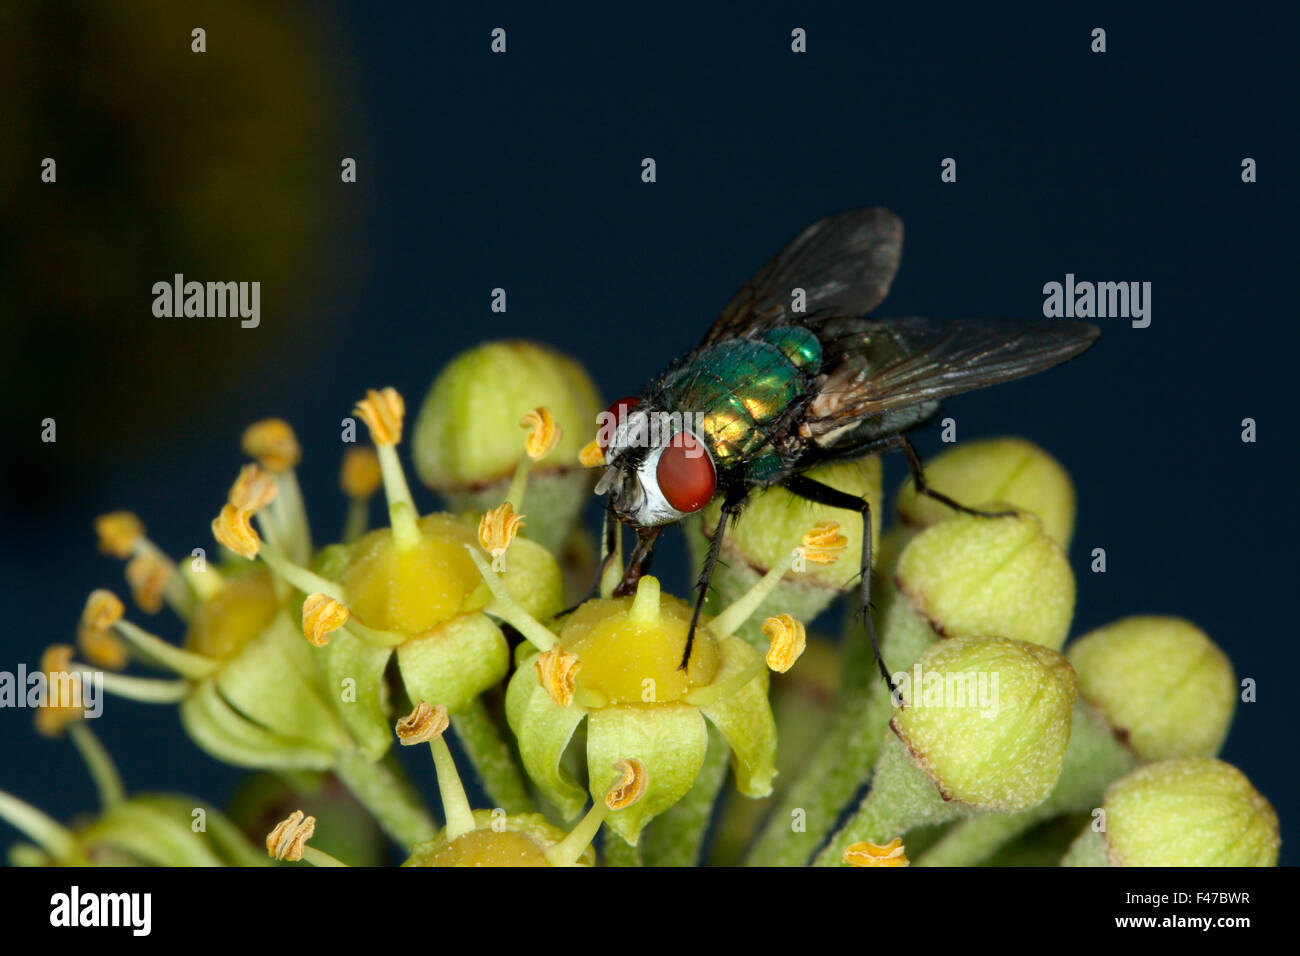 Close-up of a blowfly on a flower, Sweden. Stock Photo